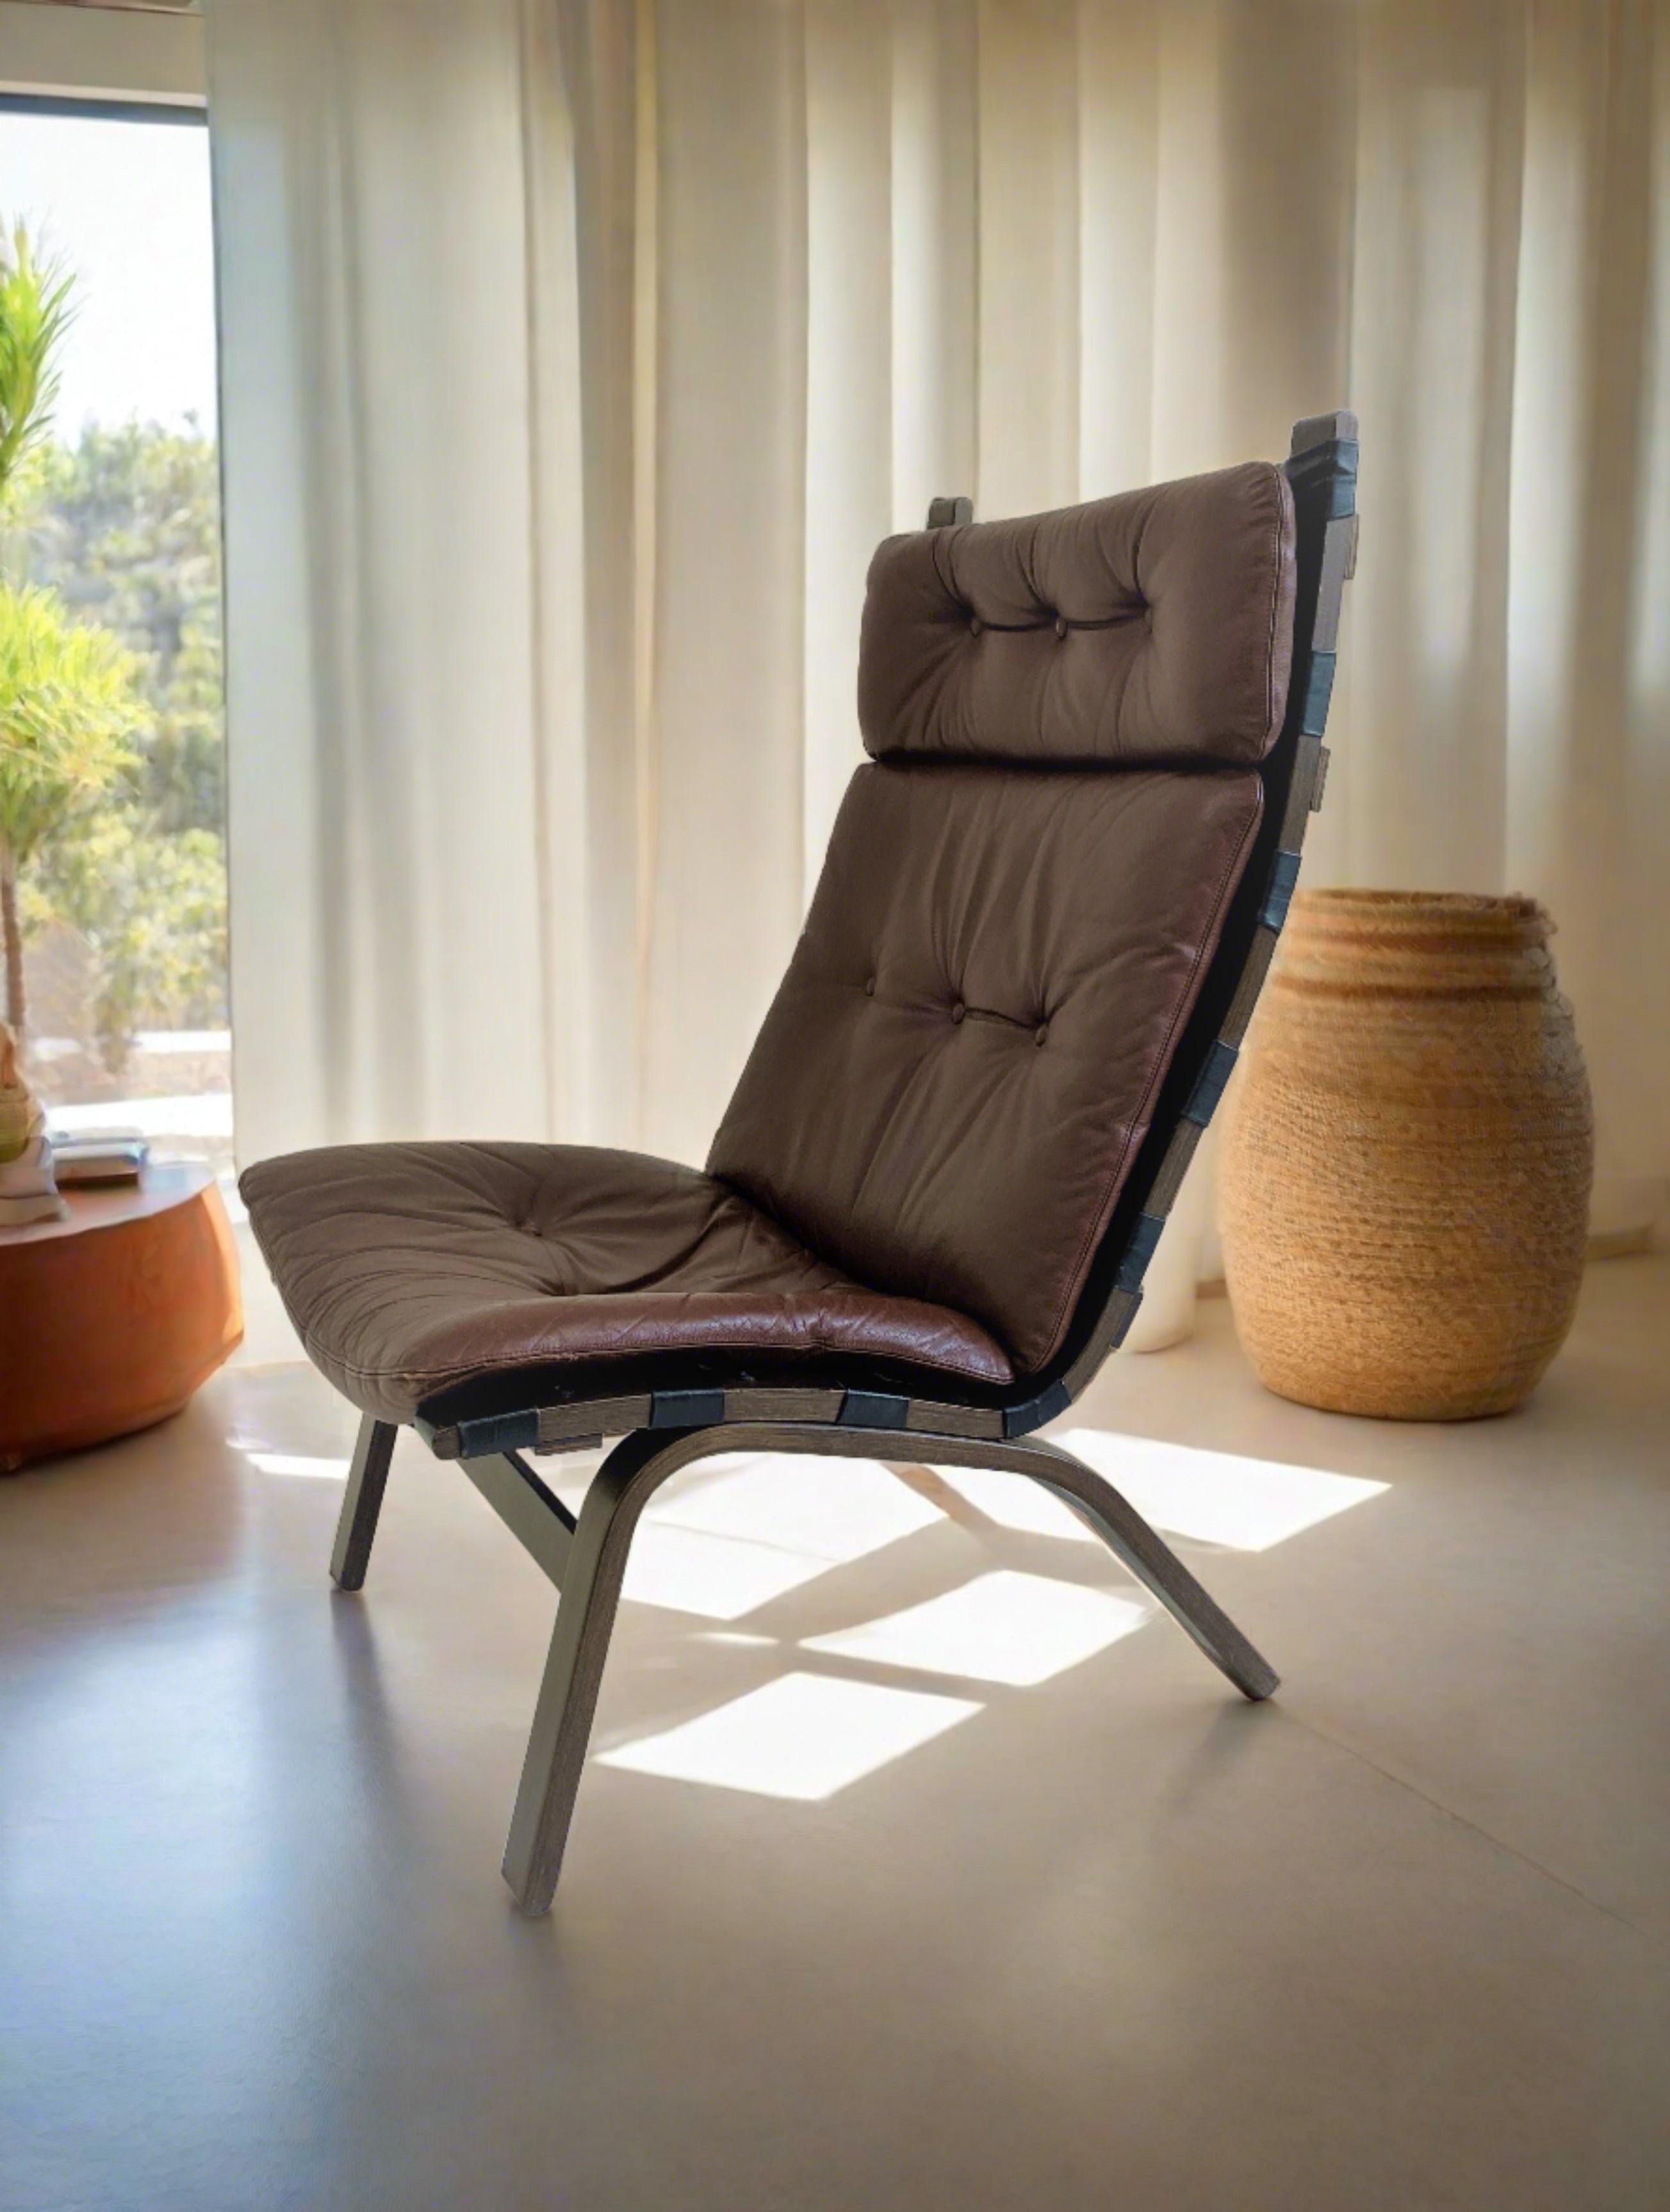 Late 20th Century Danish Brown Leather Lounge Chair Farstrup, Denmark 1970 For Sale